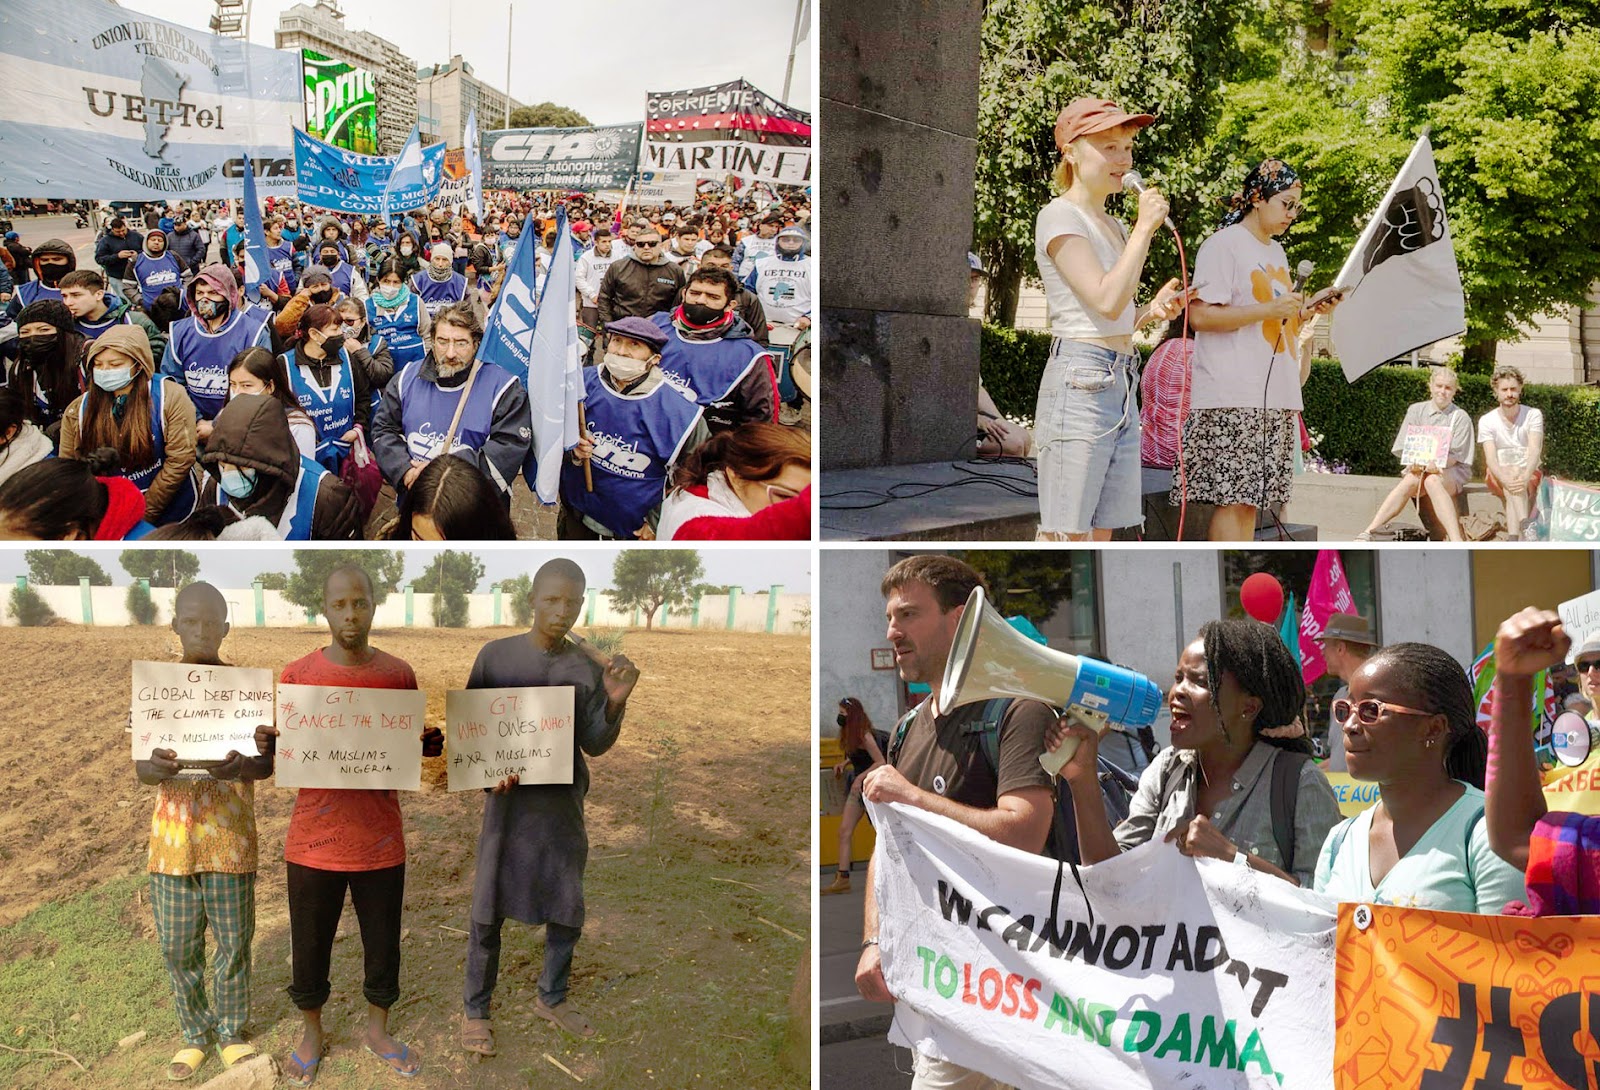 Debt For Climate Action Montage: huge crowds march in Argentina, Finnish rebels speak outside a major bank, a D4C march in Germany, XR Muslims in Nigeria hold signs with messages for G7